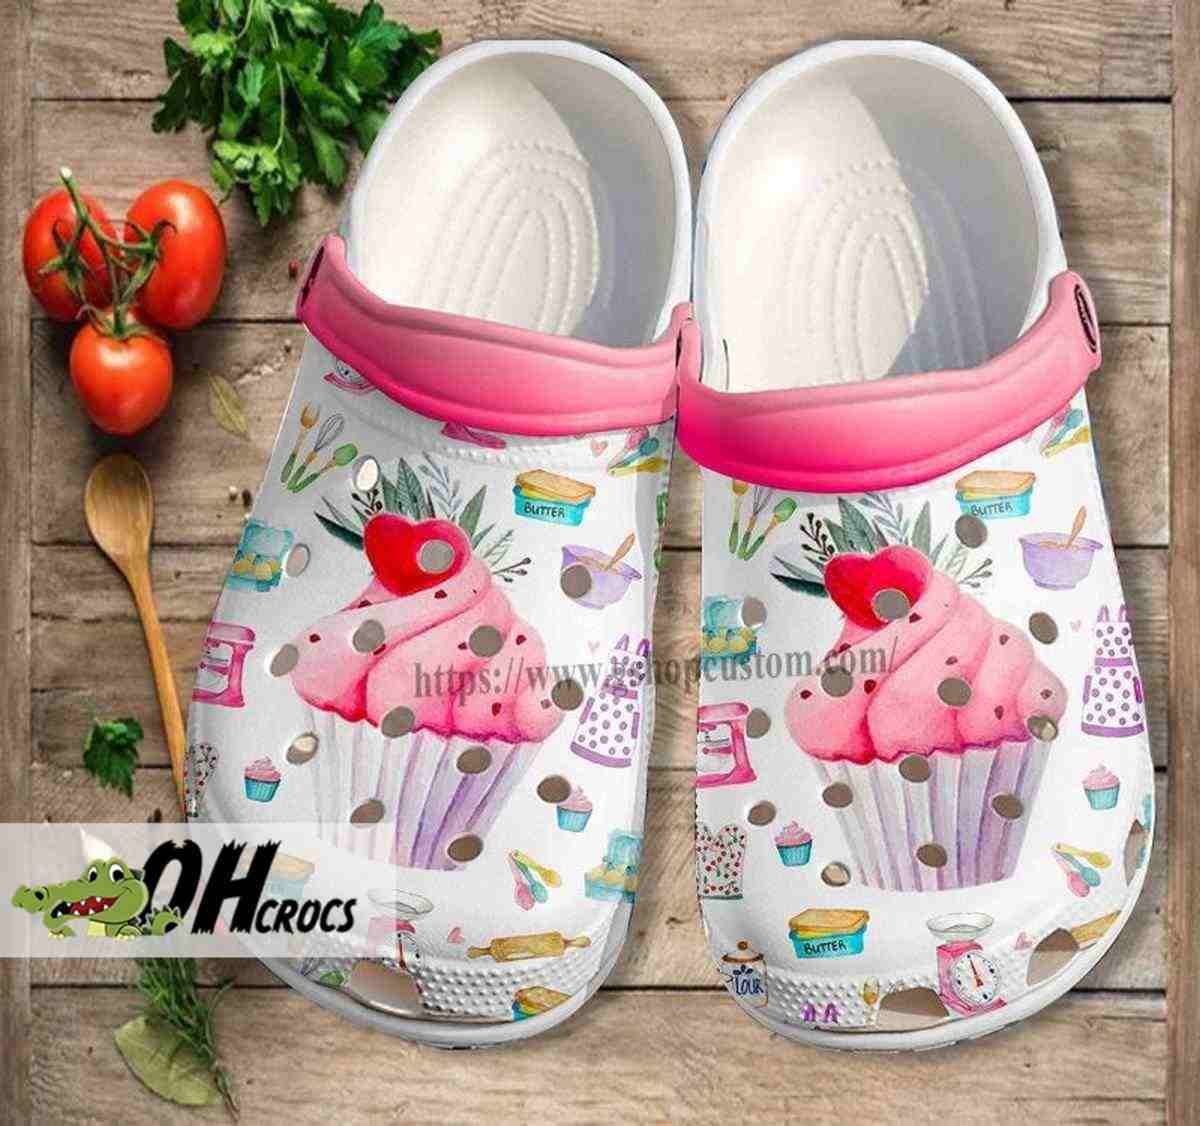 Sweet Treats Baking Themed Crocs Clogs for Culinary Moms